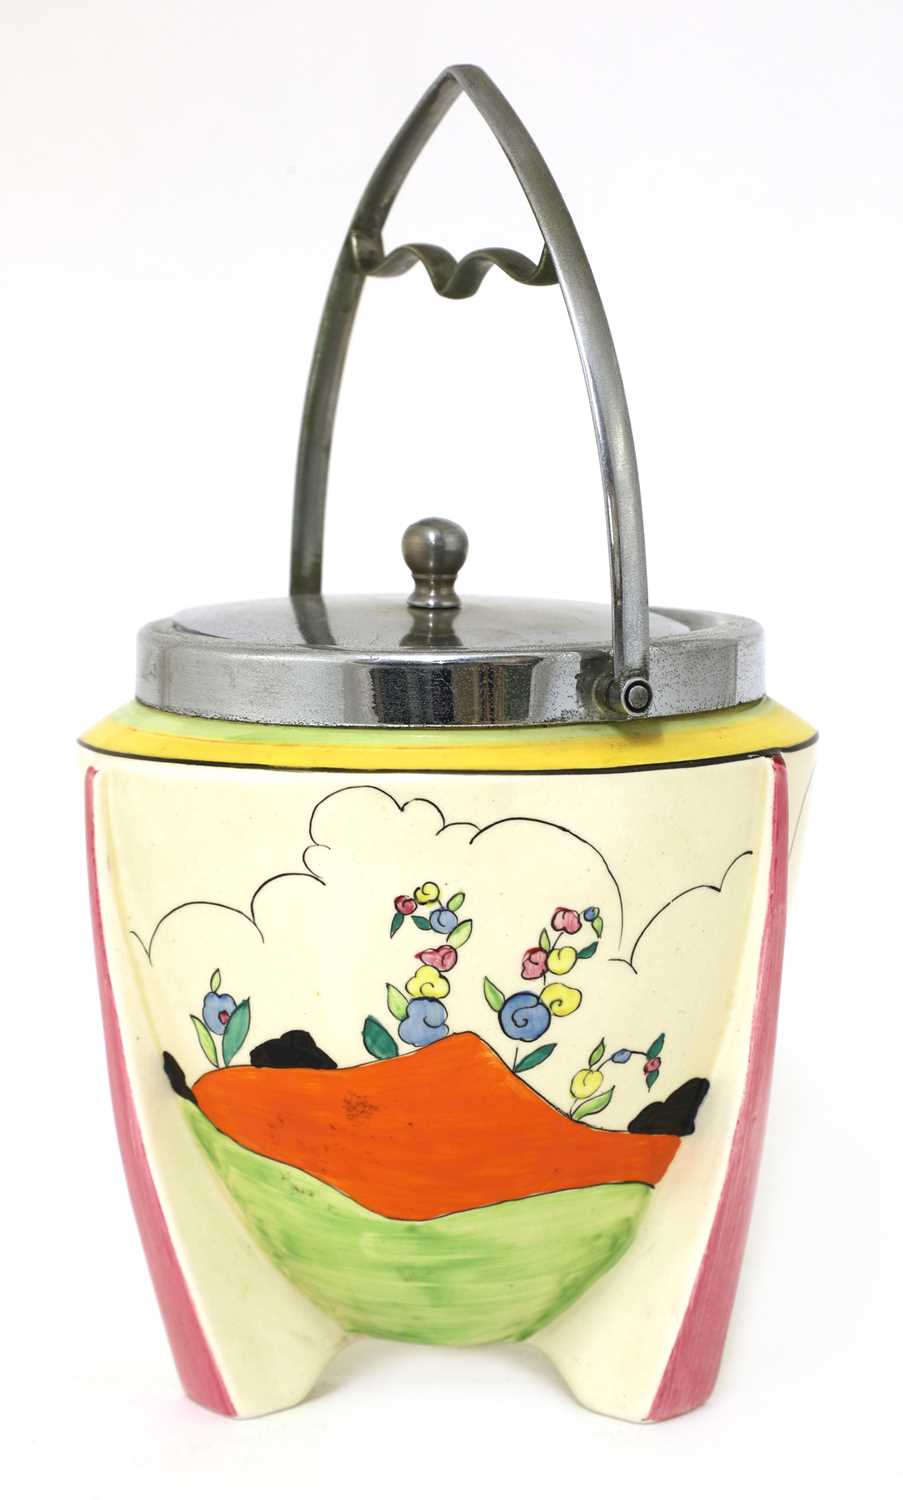 Lot 98 - A Clarice Cliff 'Applique Idyll' biscuit barrel and cover